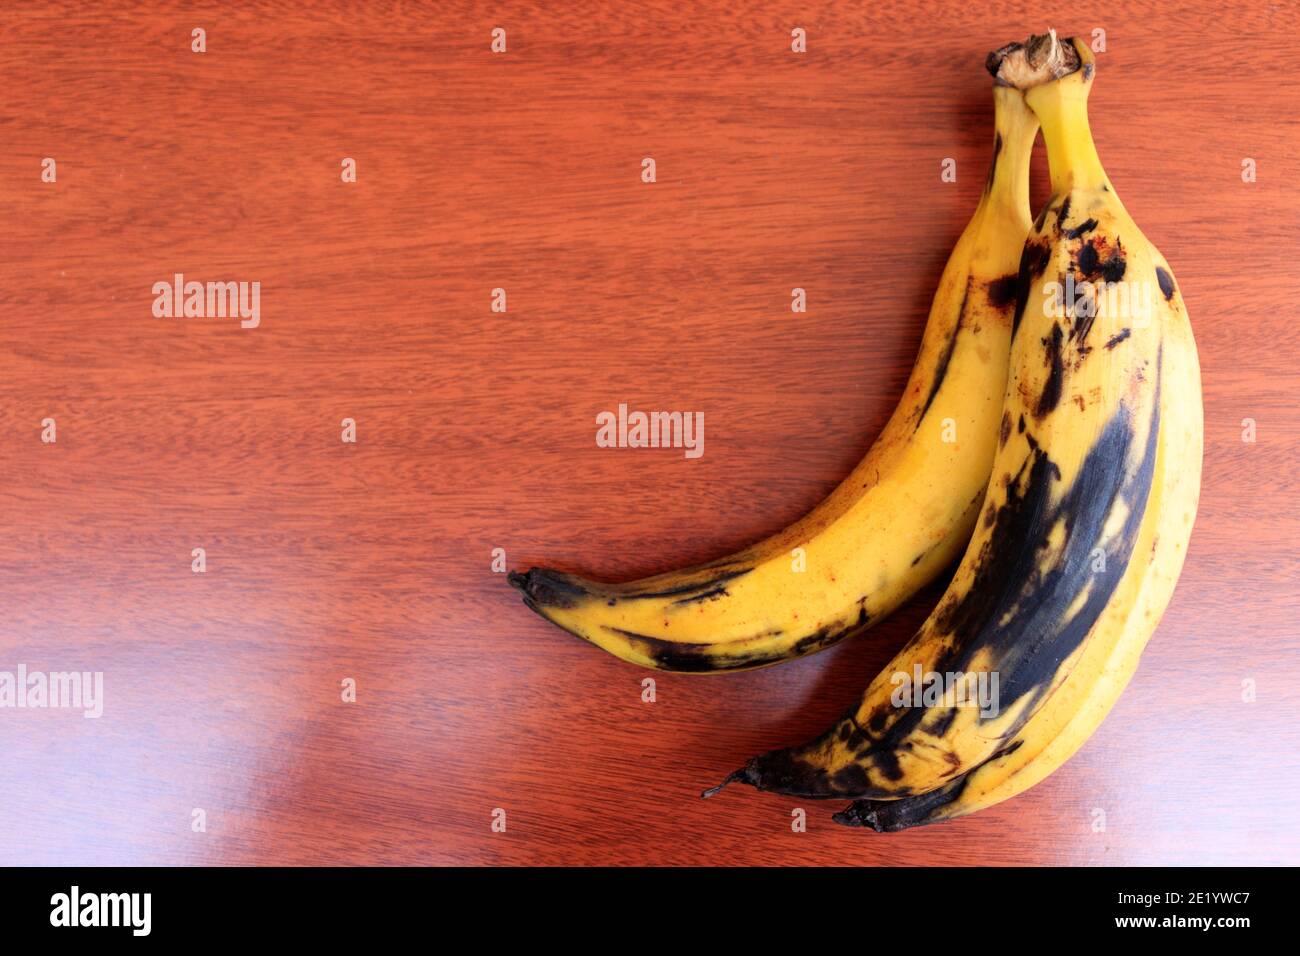 bananas on a wooden background Stock Photo